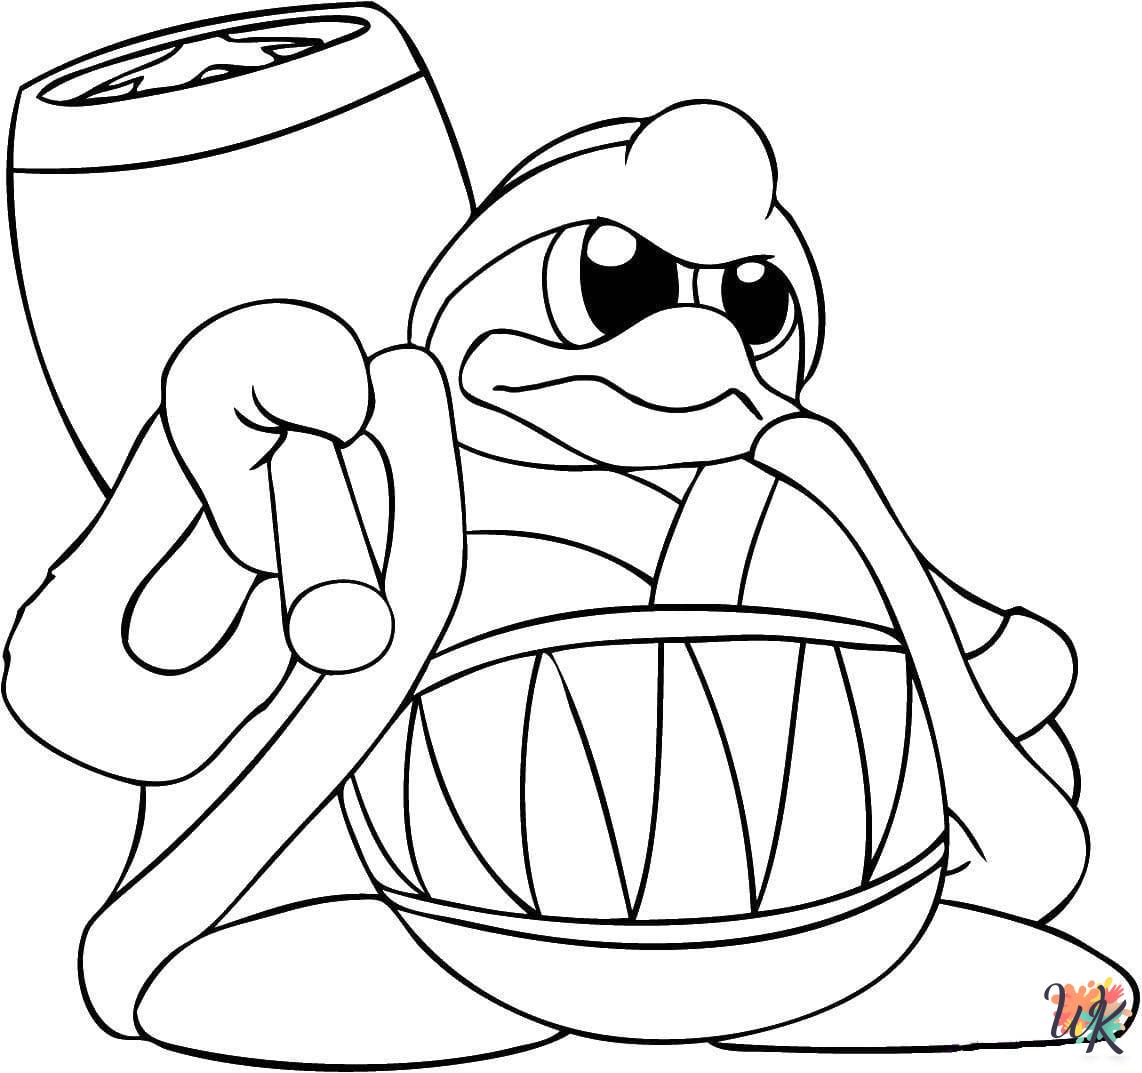 Kirby ornament coloring pages